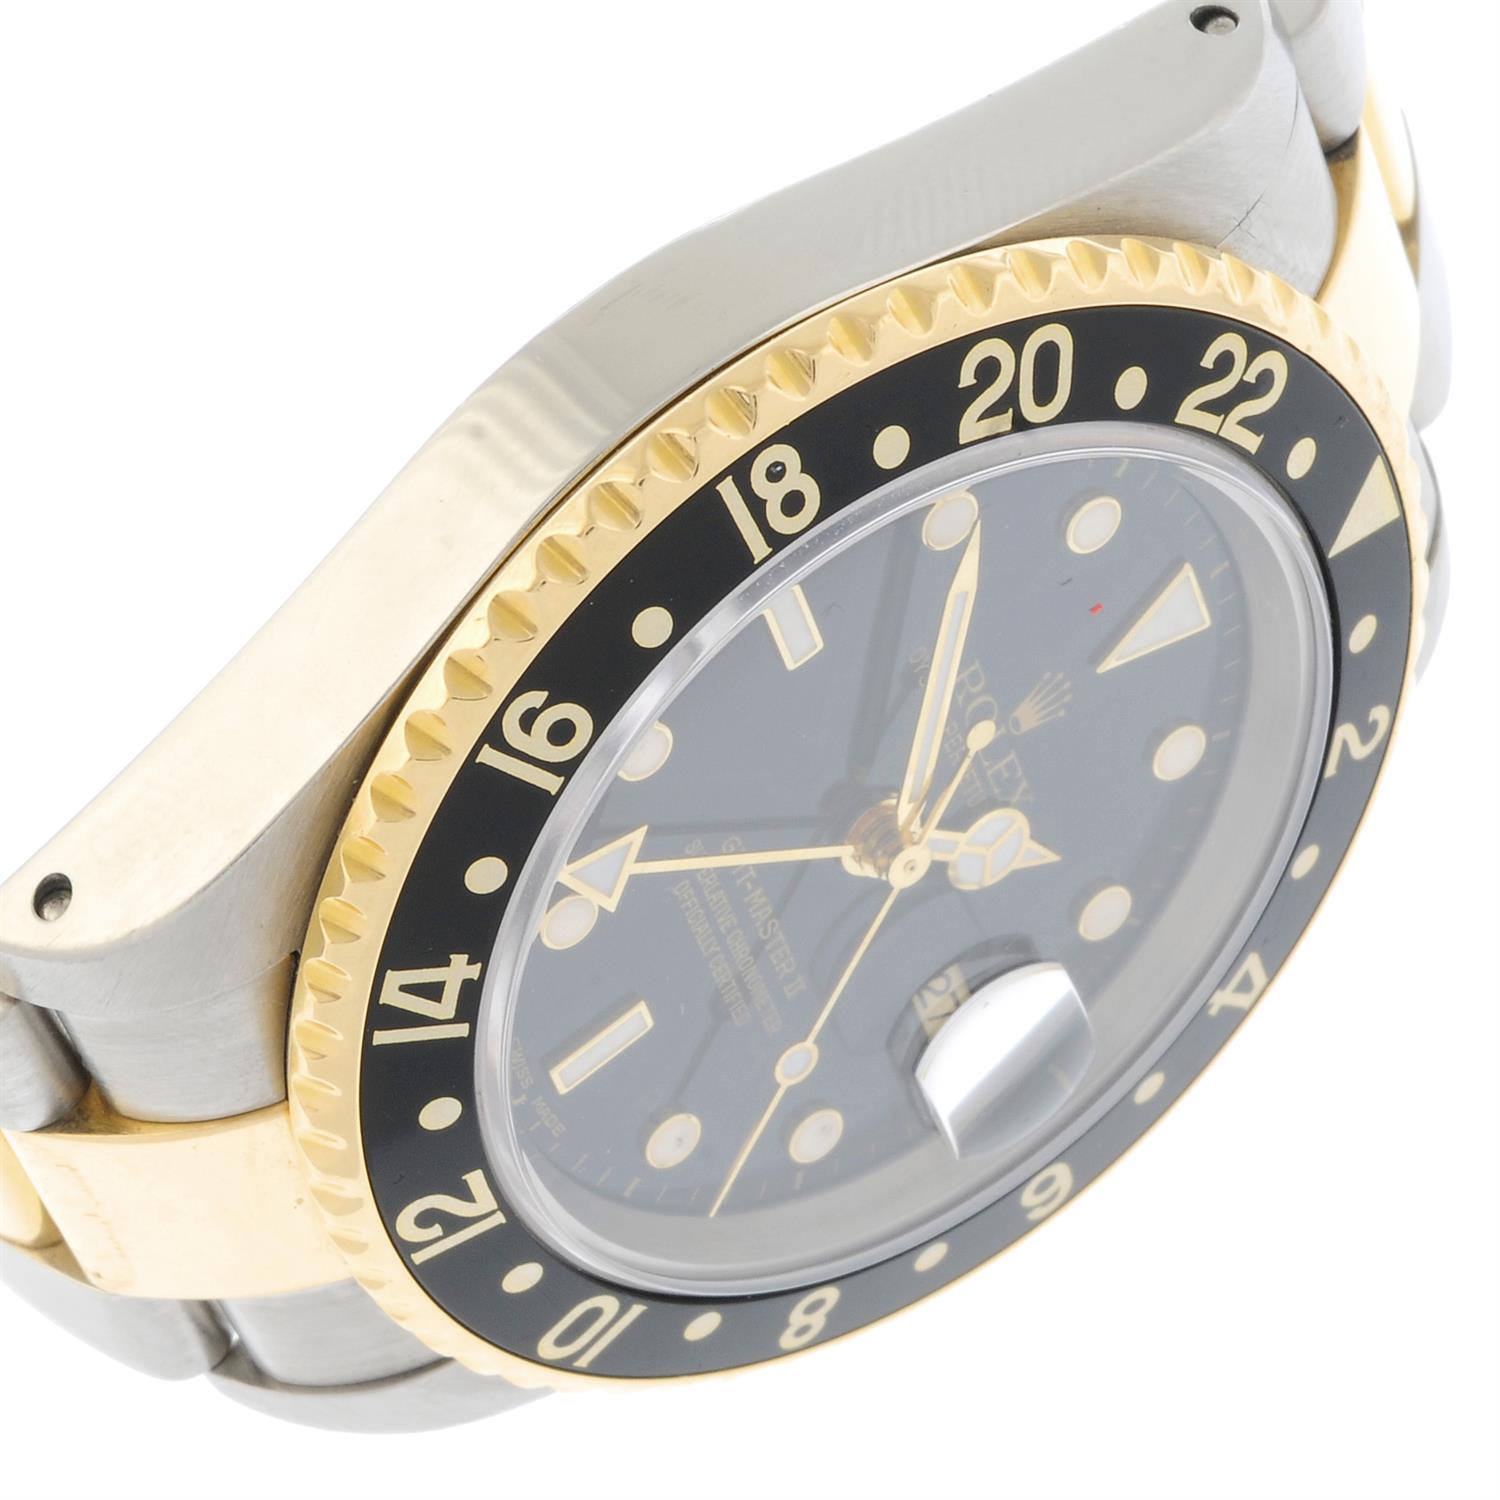 Rolex - an Oyster Perpetual GMT- Master II watch, 40mm. - Image 4 of 7